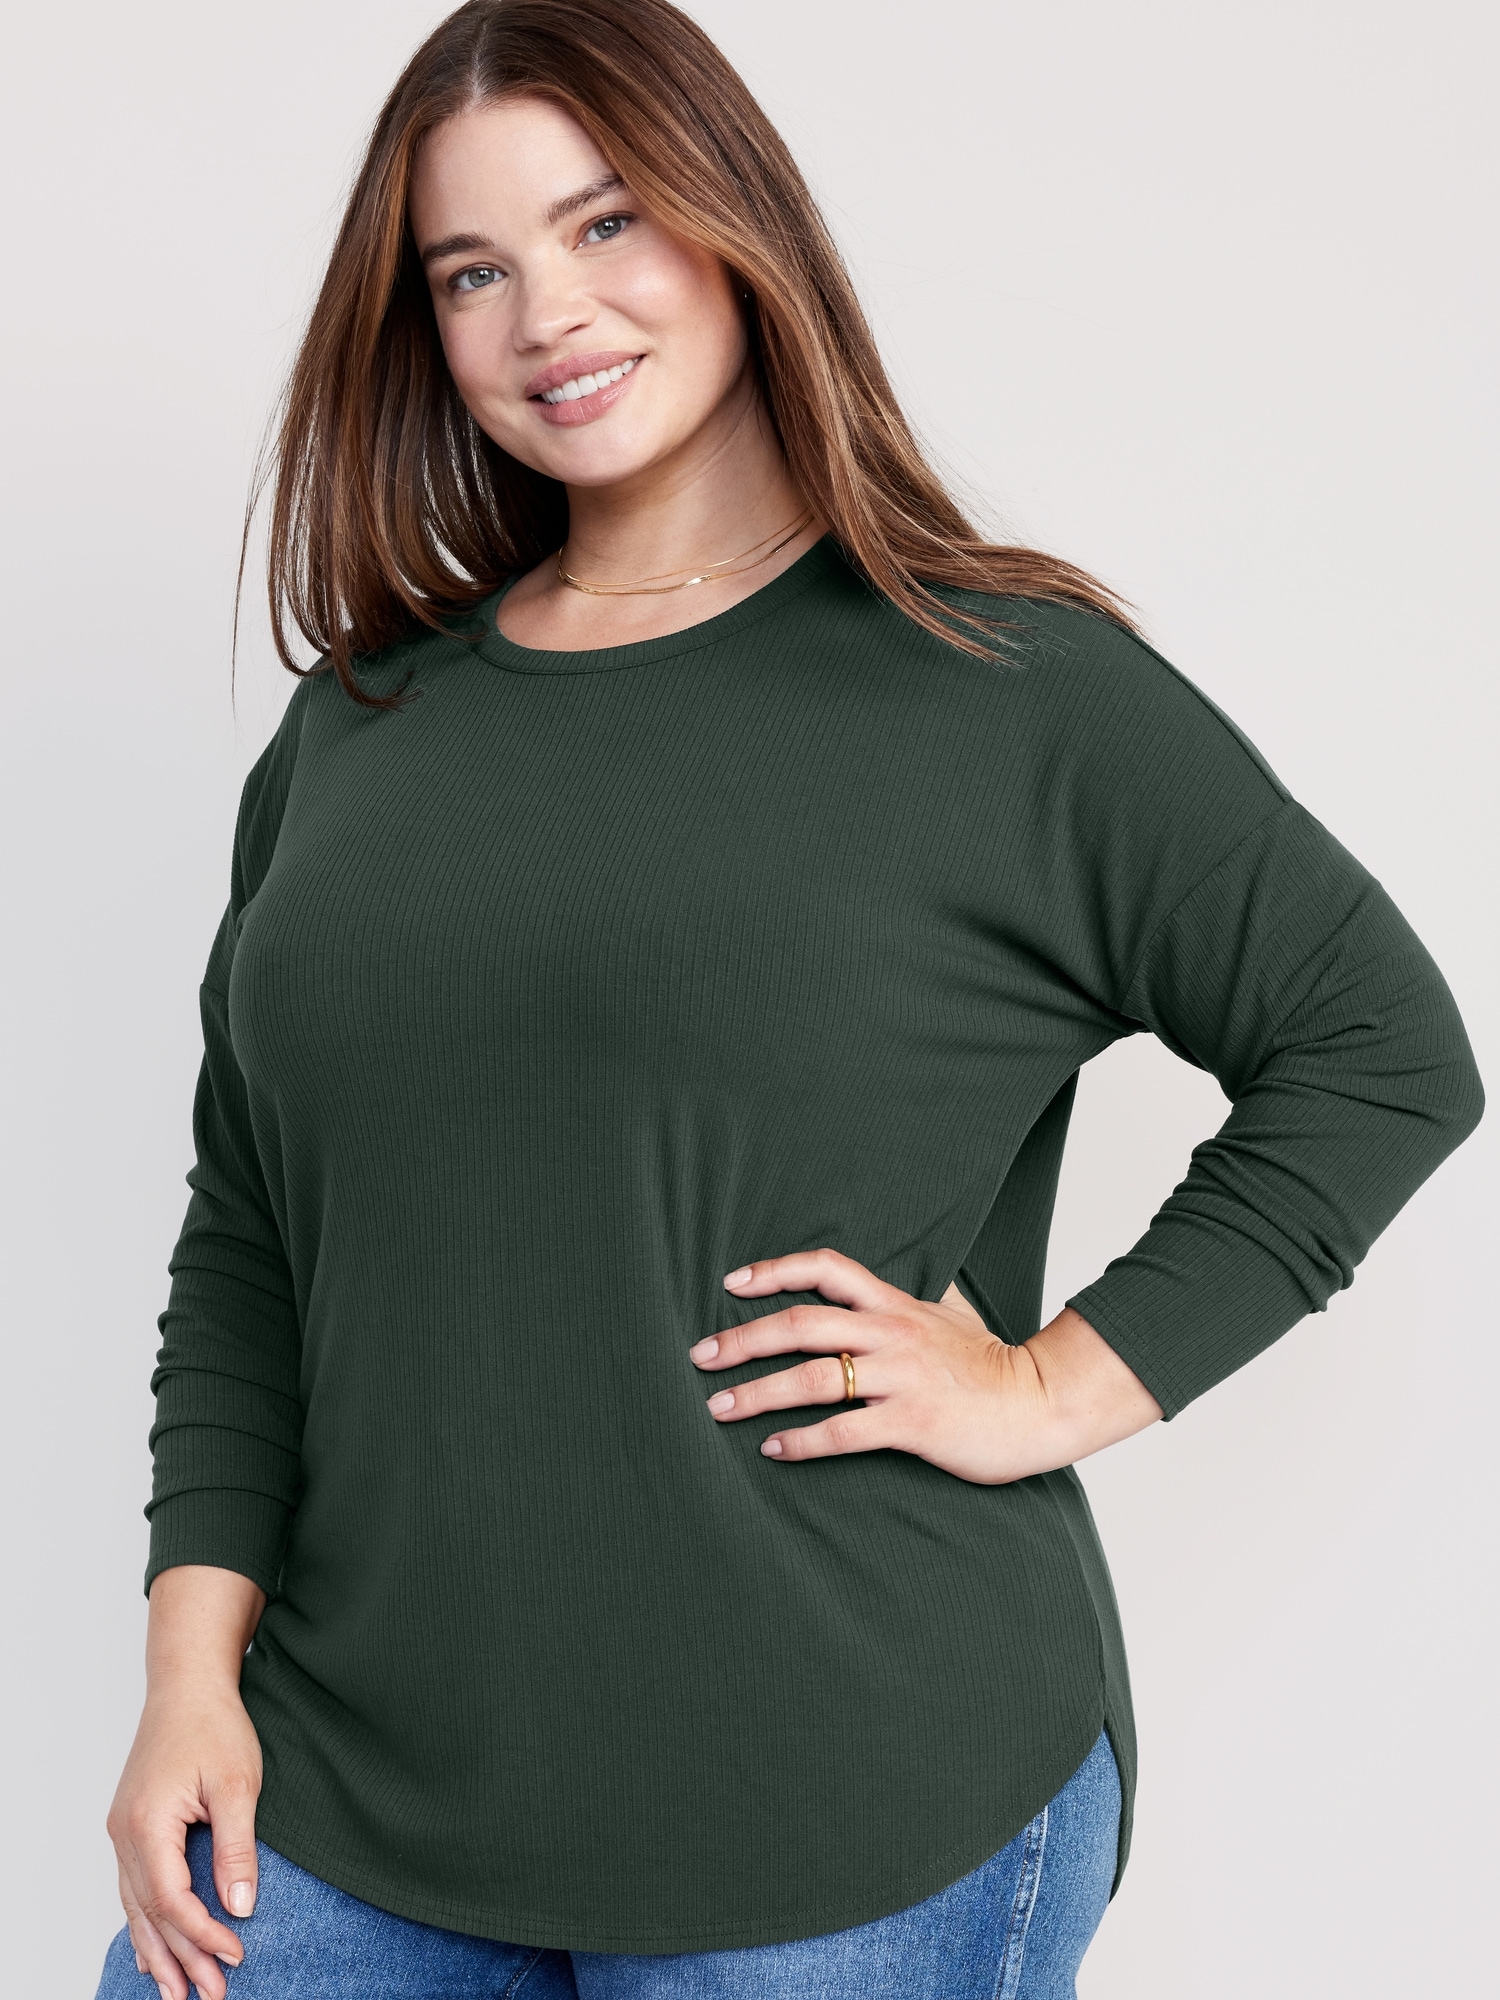 Luxe Rib-Knit Tunic T-Shirt | Old Navy